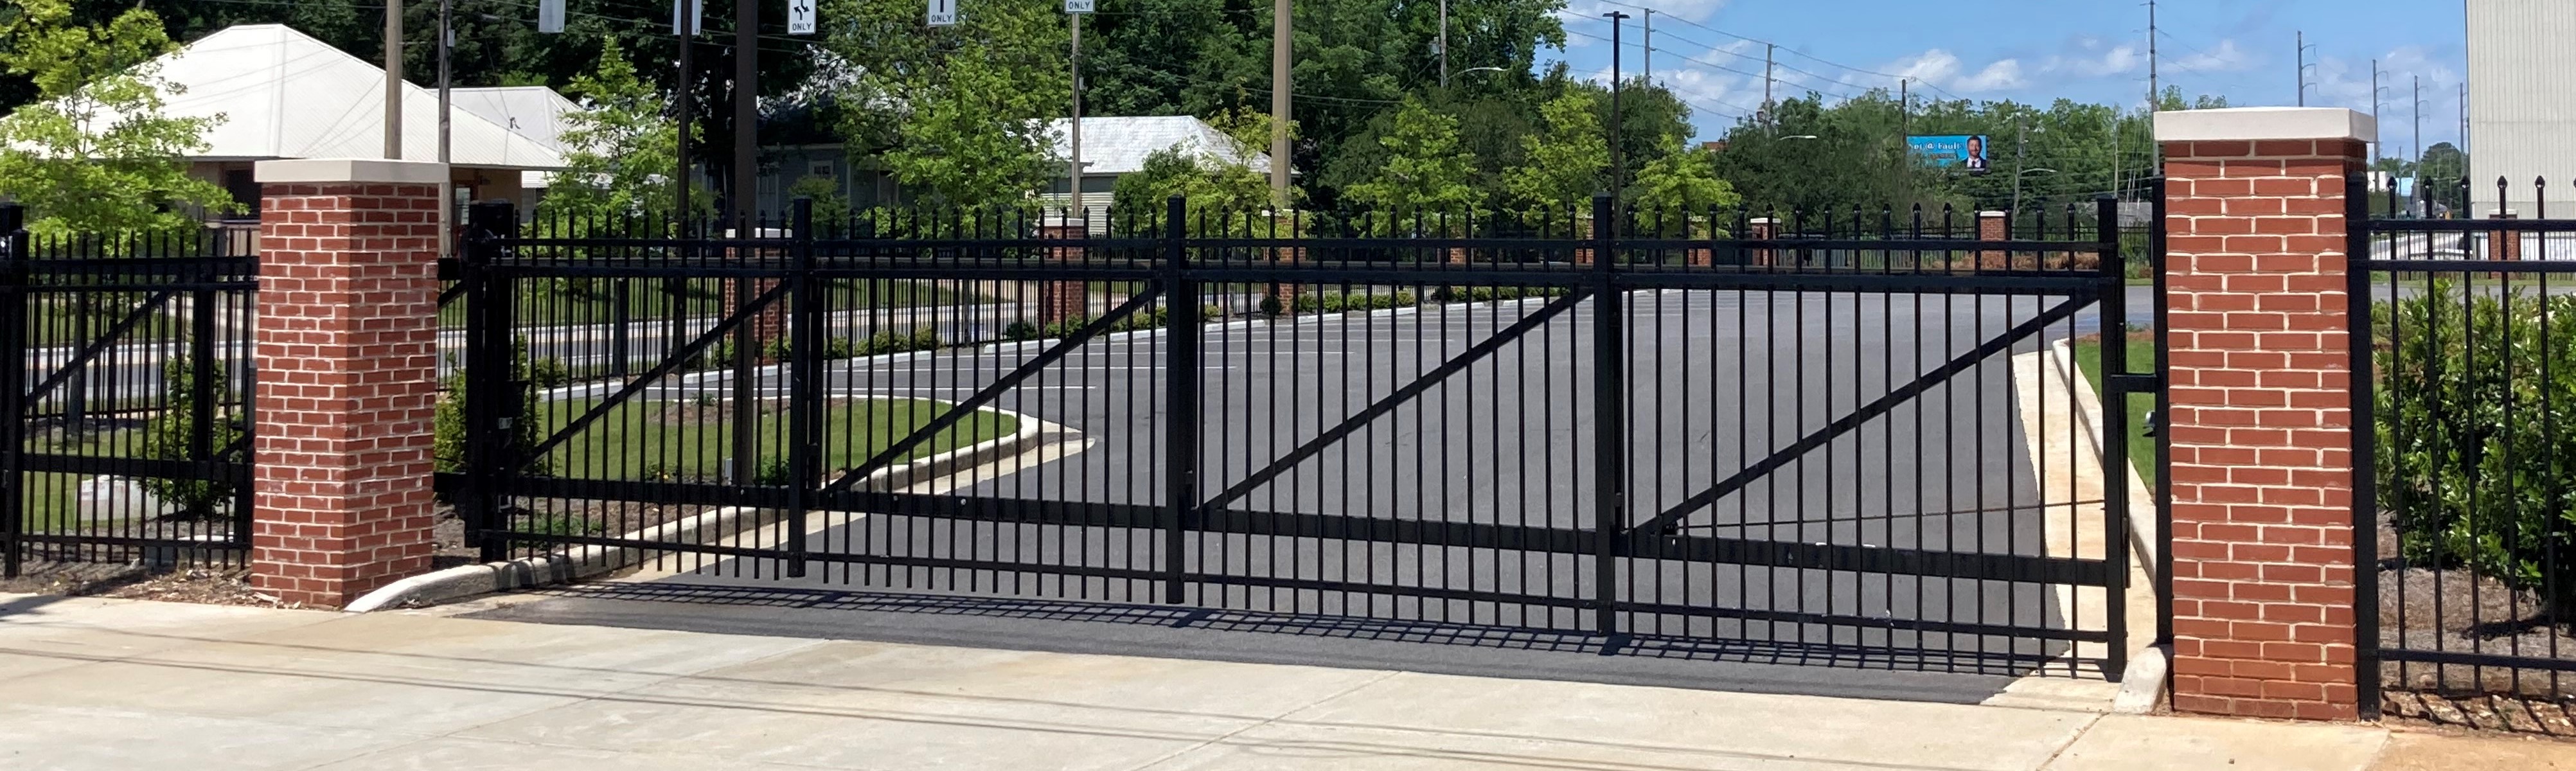 Hire Us to Install an Automatic Driveway Gate for Your Home in Phenix City & Opelika, AL & Columbus, GA